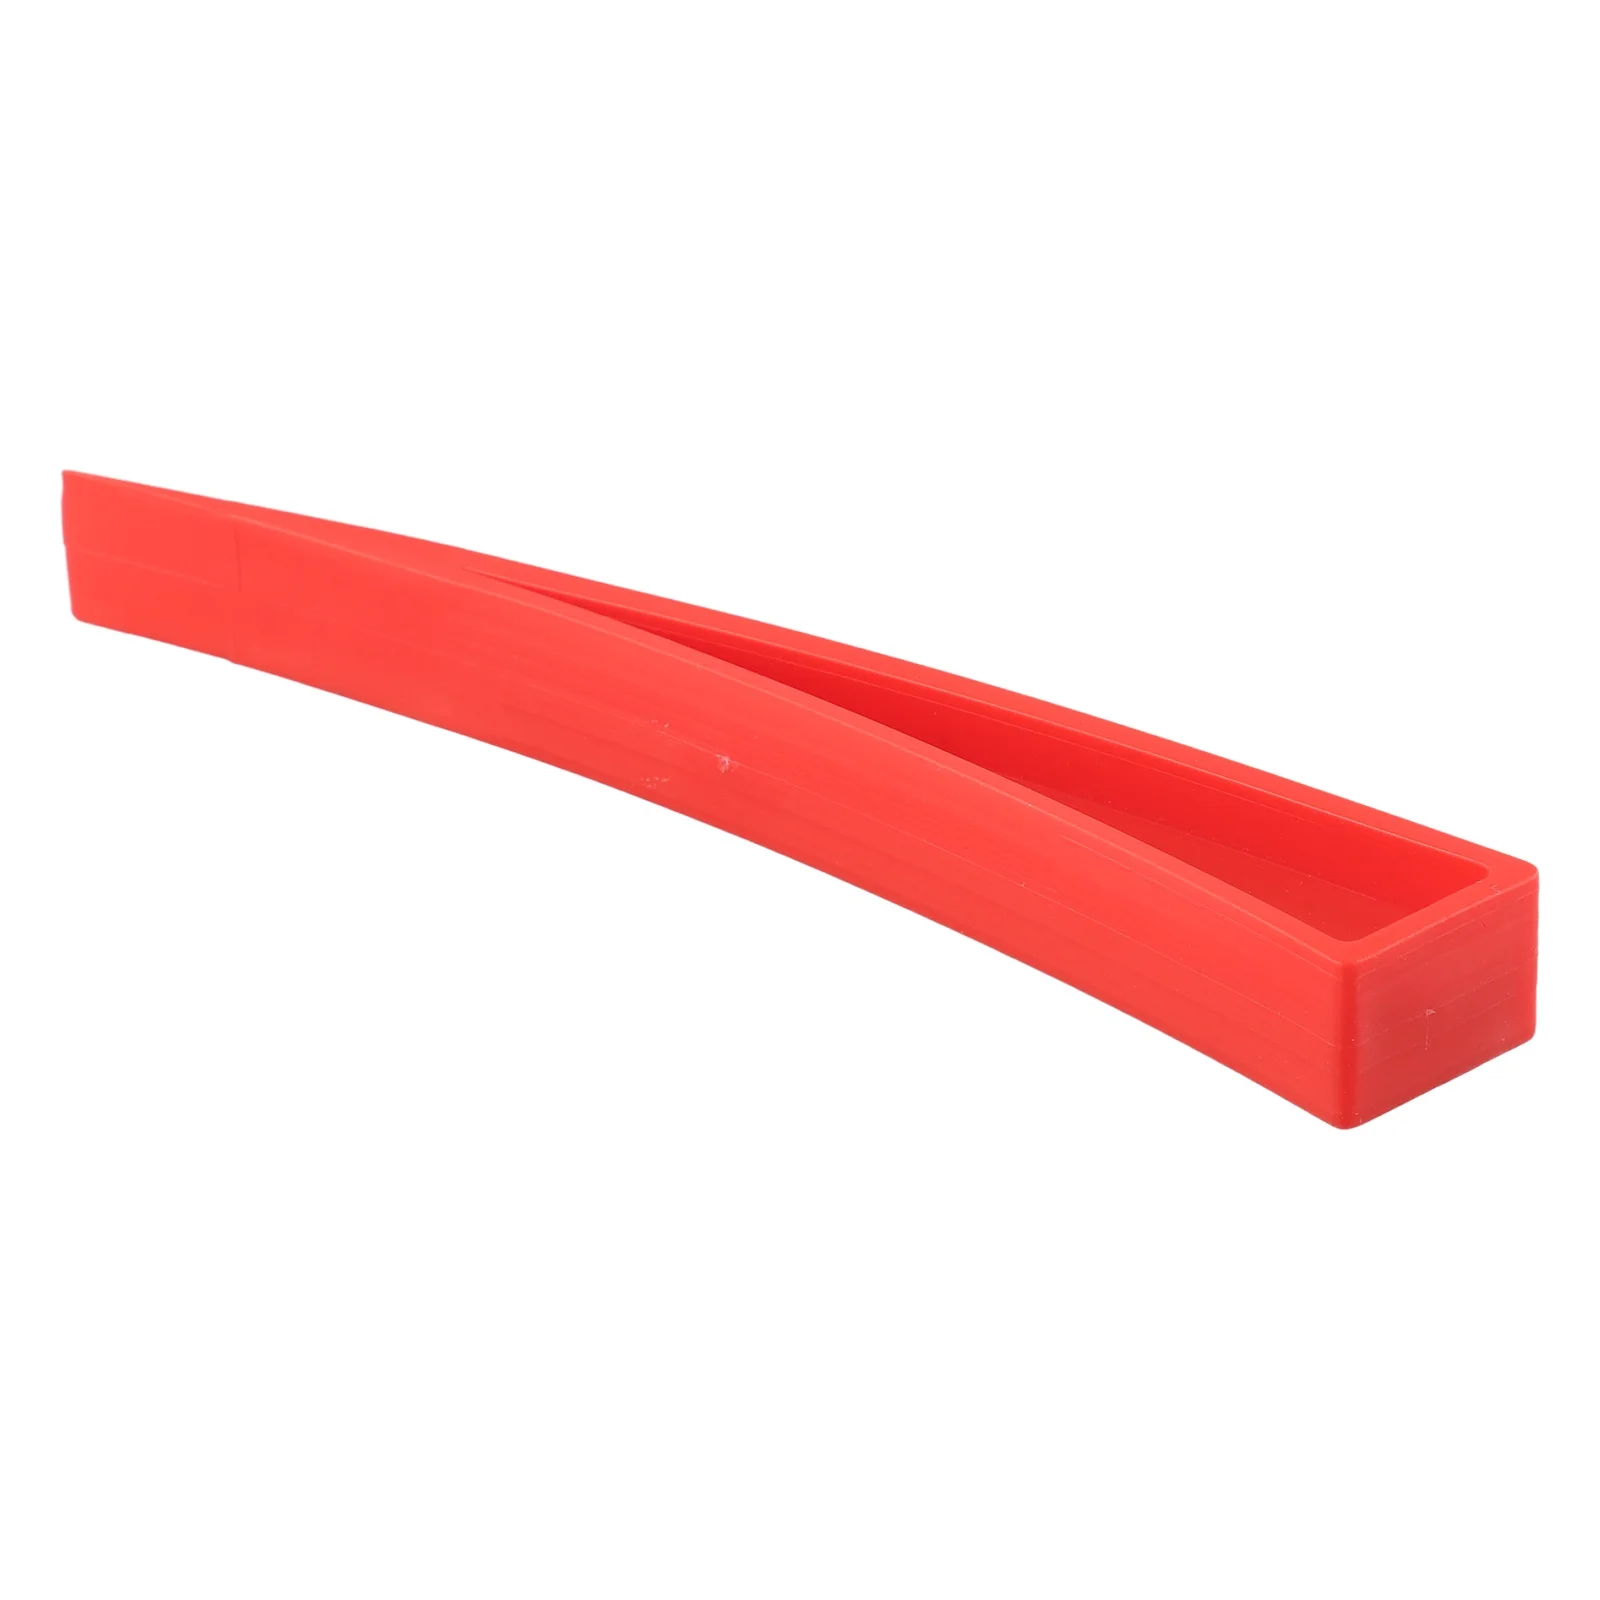 

Easy to Use Red Auto Car Door Dent Removal Wedge Portable and Convenient Tool for Panel Repairs Say Goodbye to Unsightly Dents